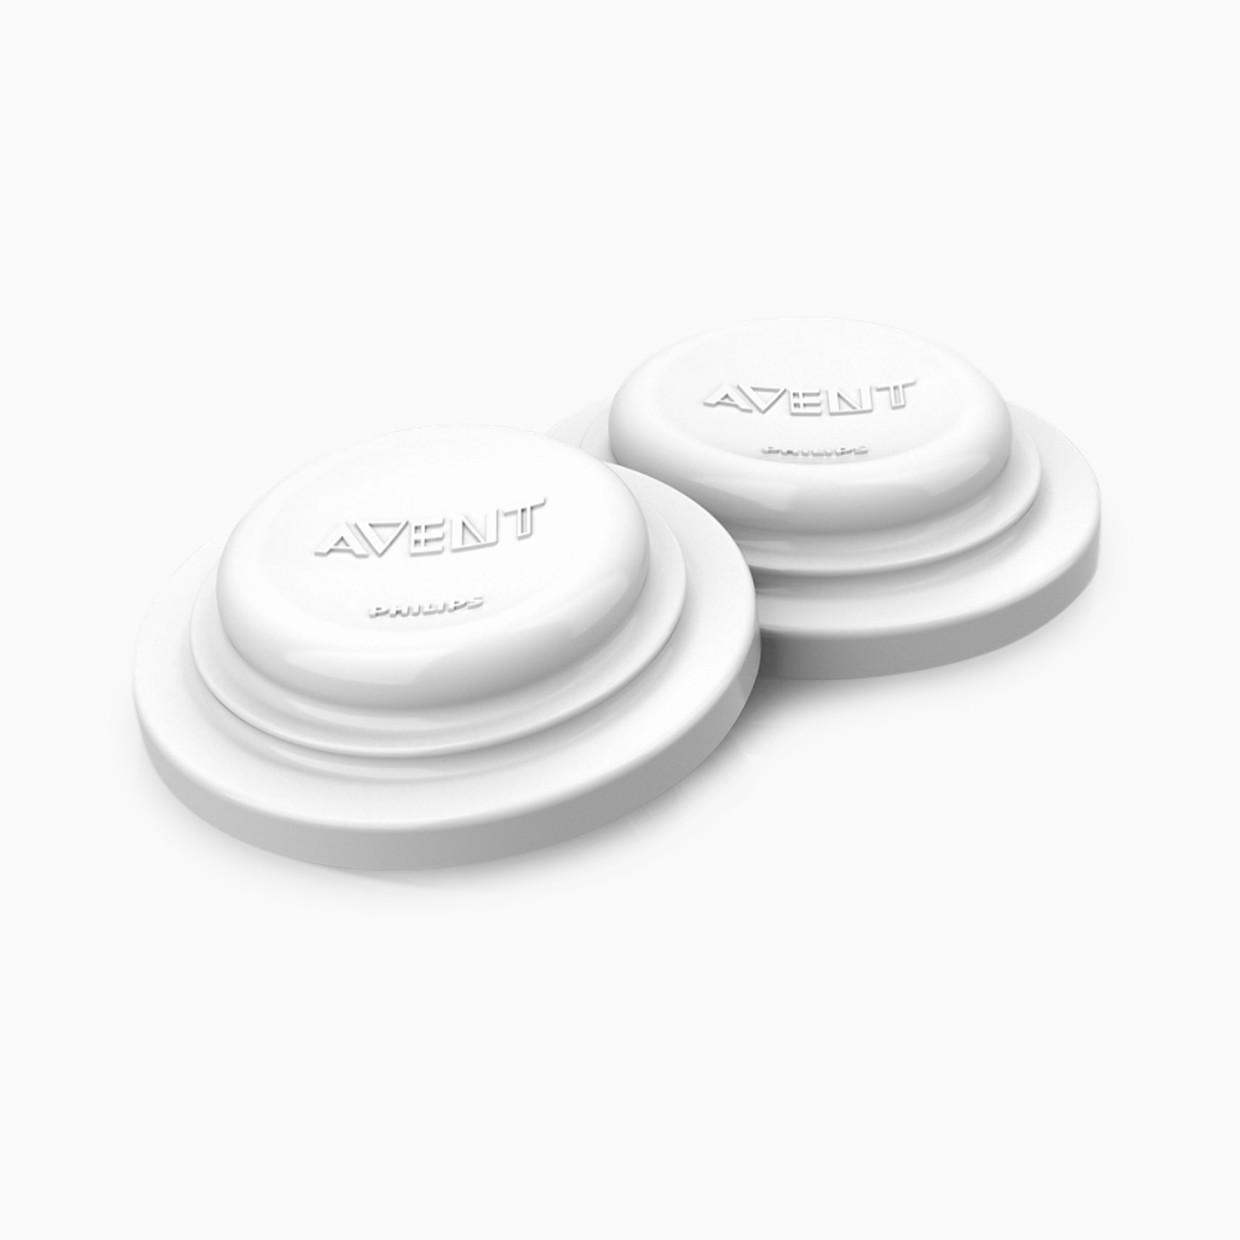 Philips Avent Anti-colic Bottle Sealing Discs (6-pack).